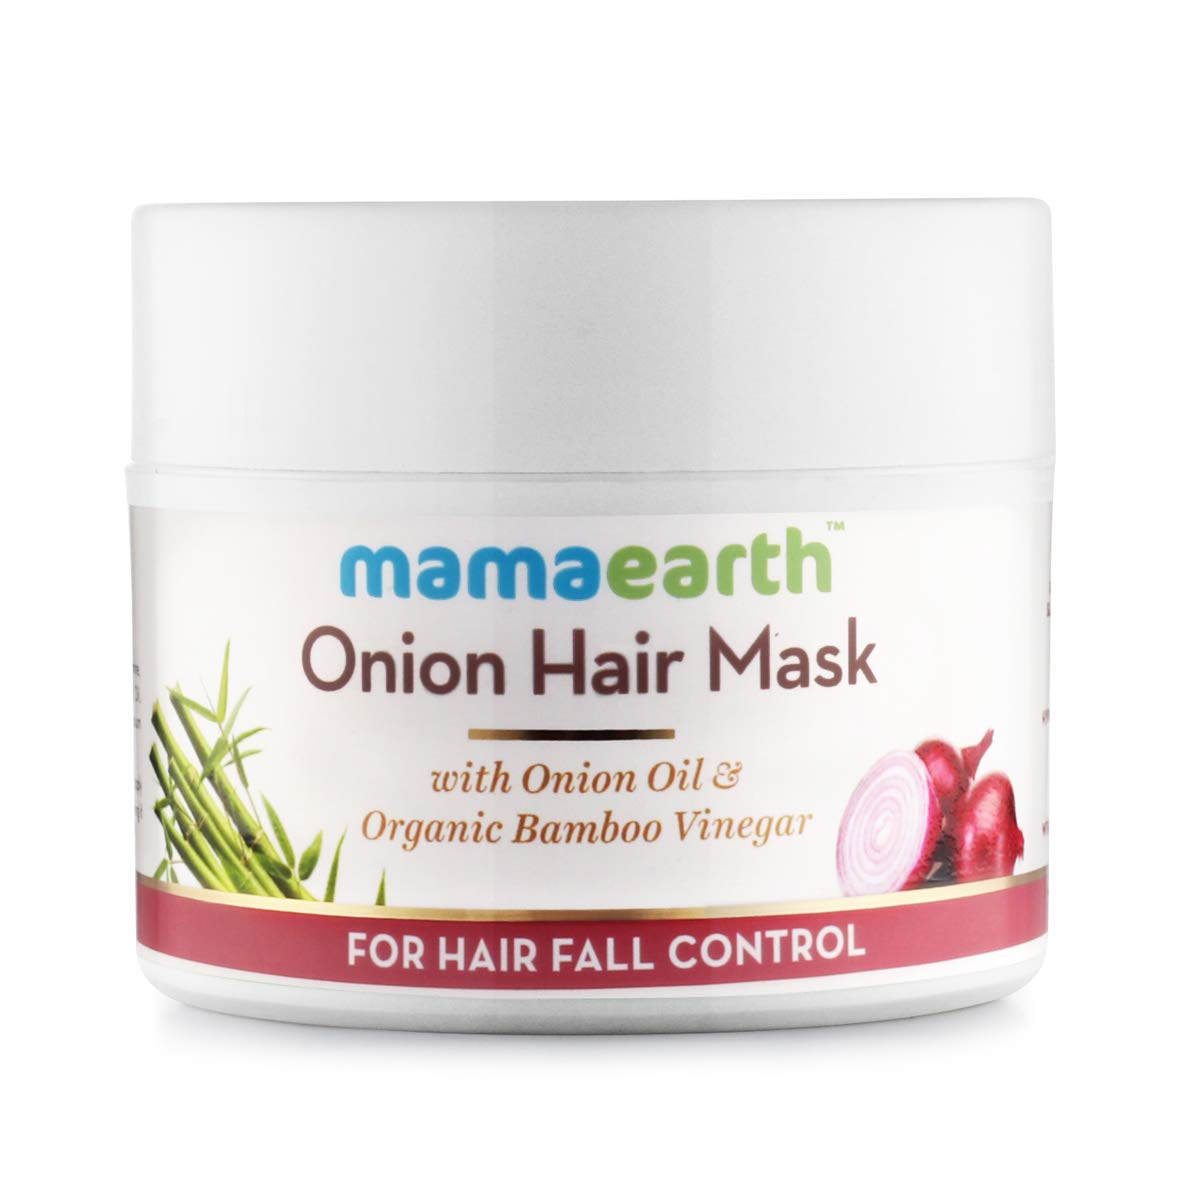 Mamaearth onion hair mask review